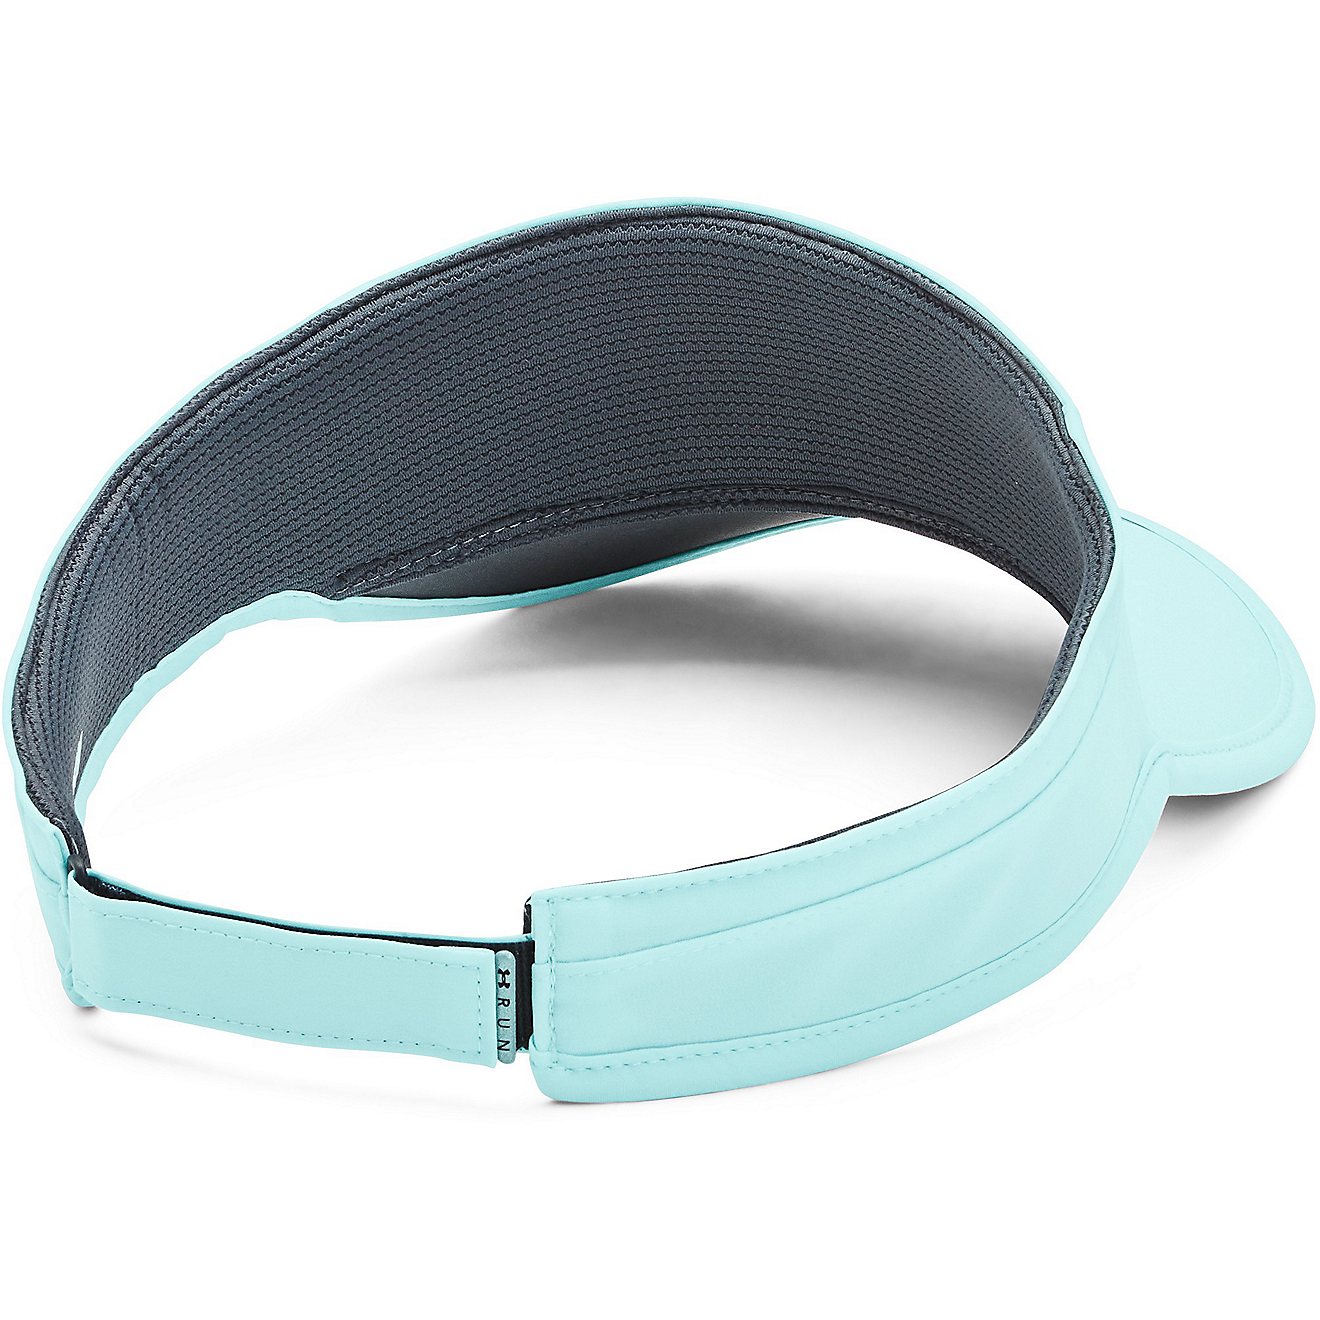 Under Armour Women's Iso-Chill Launch Run Visor                                                                                  - view number 2